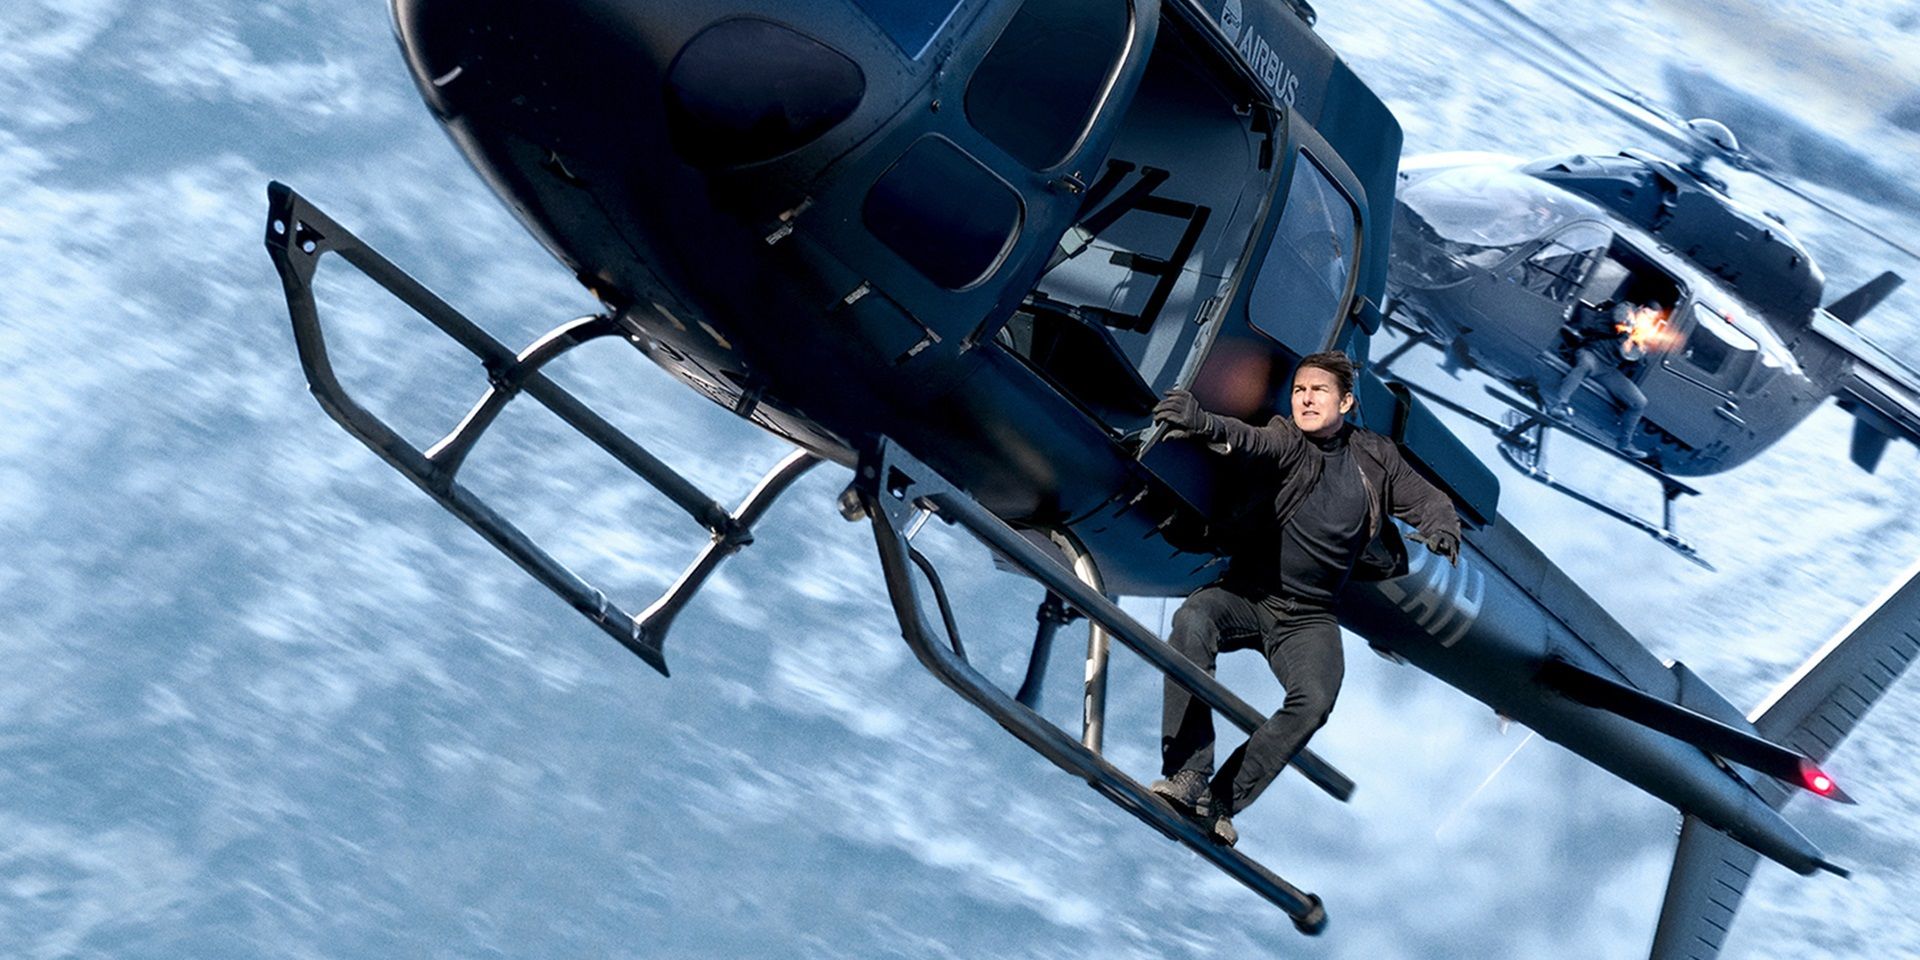 Tom Cruise hangs from a helicopter in Mission Impossible Fallout